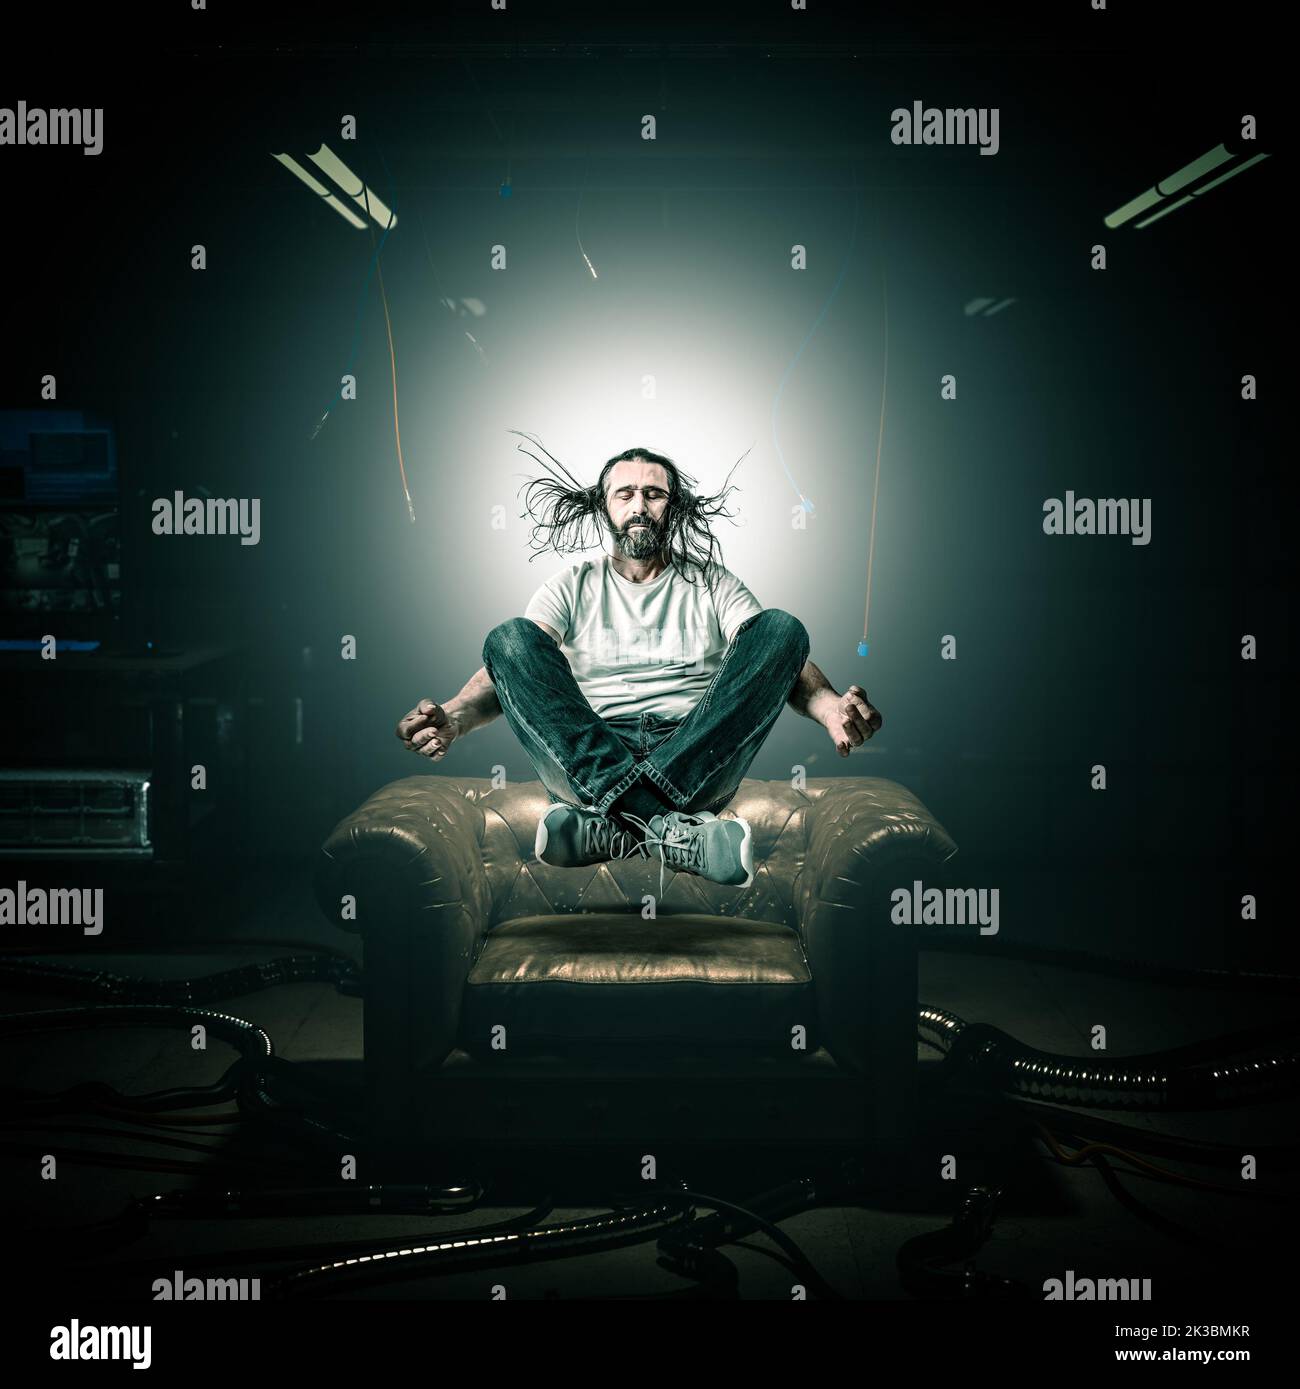 man in meditation floats in the air above an armchair, hacker room background Stock Photo